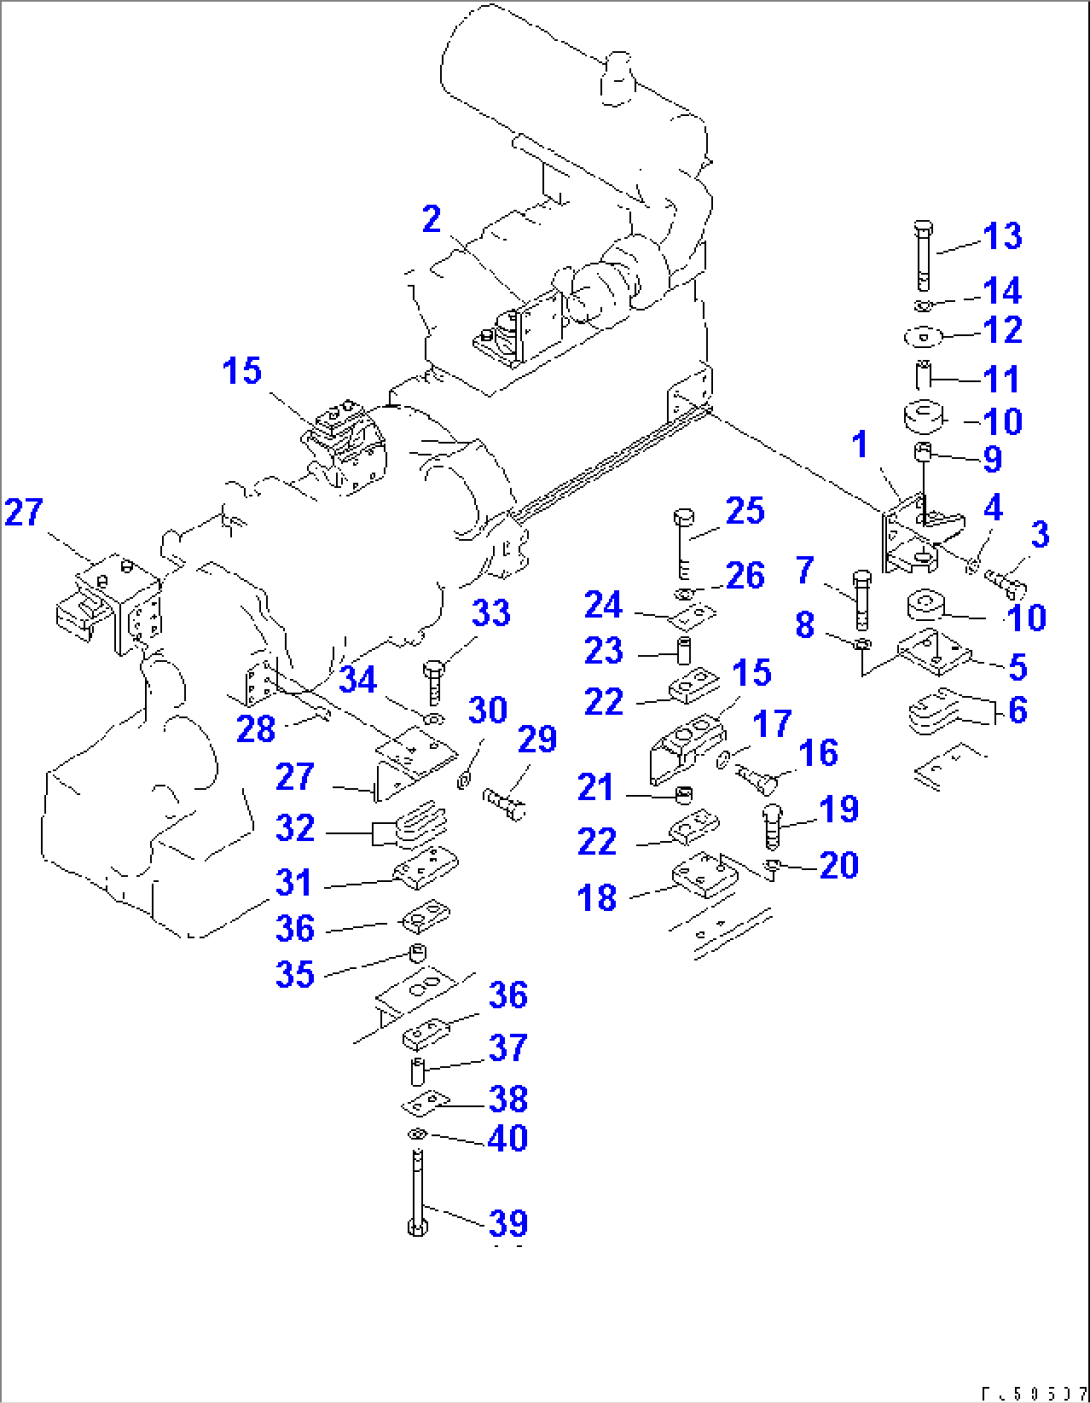 ENGINE AND TRANSMISSION MOUNTING PARTS(#6691-)